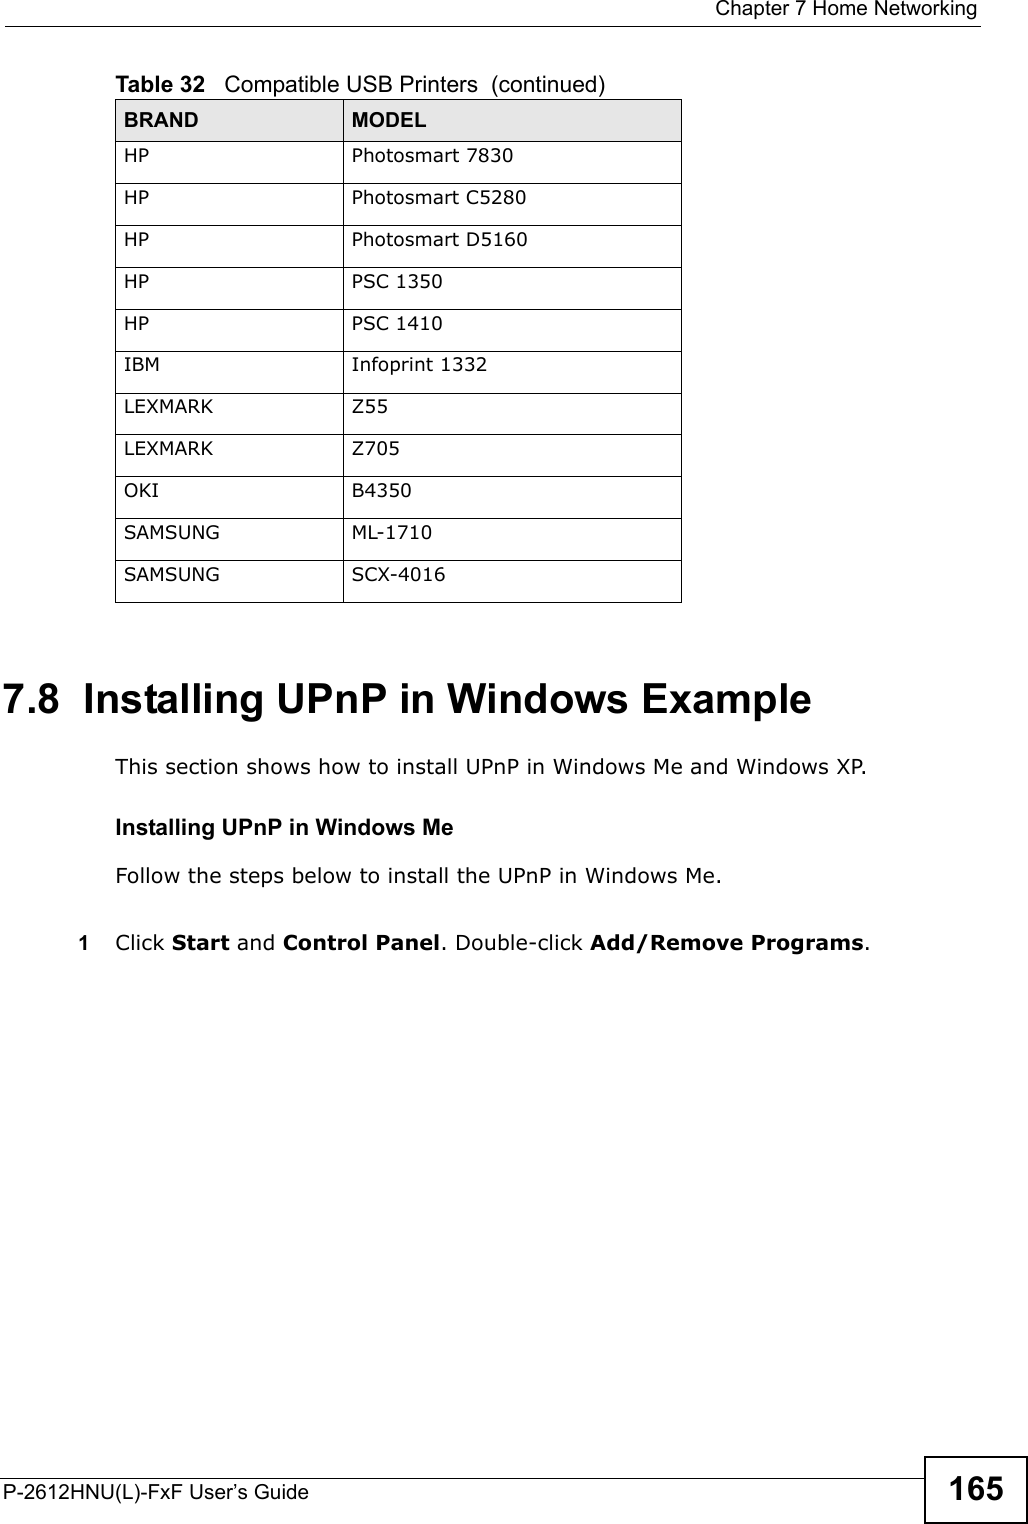  Chapter 7 Home NetworkingP-2612HNU(L)-FxF User’s Guide 1657.8  Installing UPnP in Windows ExampleThis section shows how to install UPnP in Windows Me and Windows XP.  Installing UPnP in Windows MeFollow the steps below to install the UPnP in Windows Me. 1Click Start and Control Panel. Double-click Add/Remove Programs.HP Photosmart 7830HP Photosmart C5280HP Photosmart D5160HP PSC 1350HP PSC 1410IBM Infoprint 1332LEXMARK Z55LEXMARK Z705OKI B4350SAMSUNG ML-1710SAMSUNG SCX-4016Table 32   Compatible USB Printers  (continued)BRAND MODEL